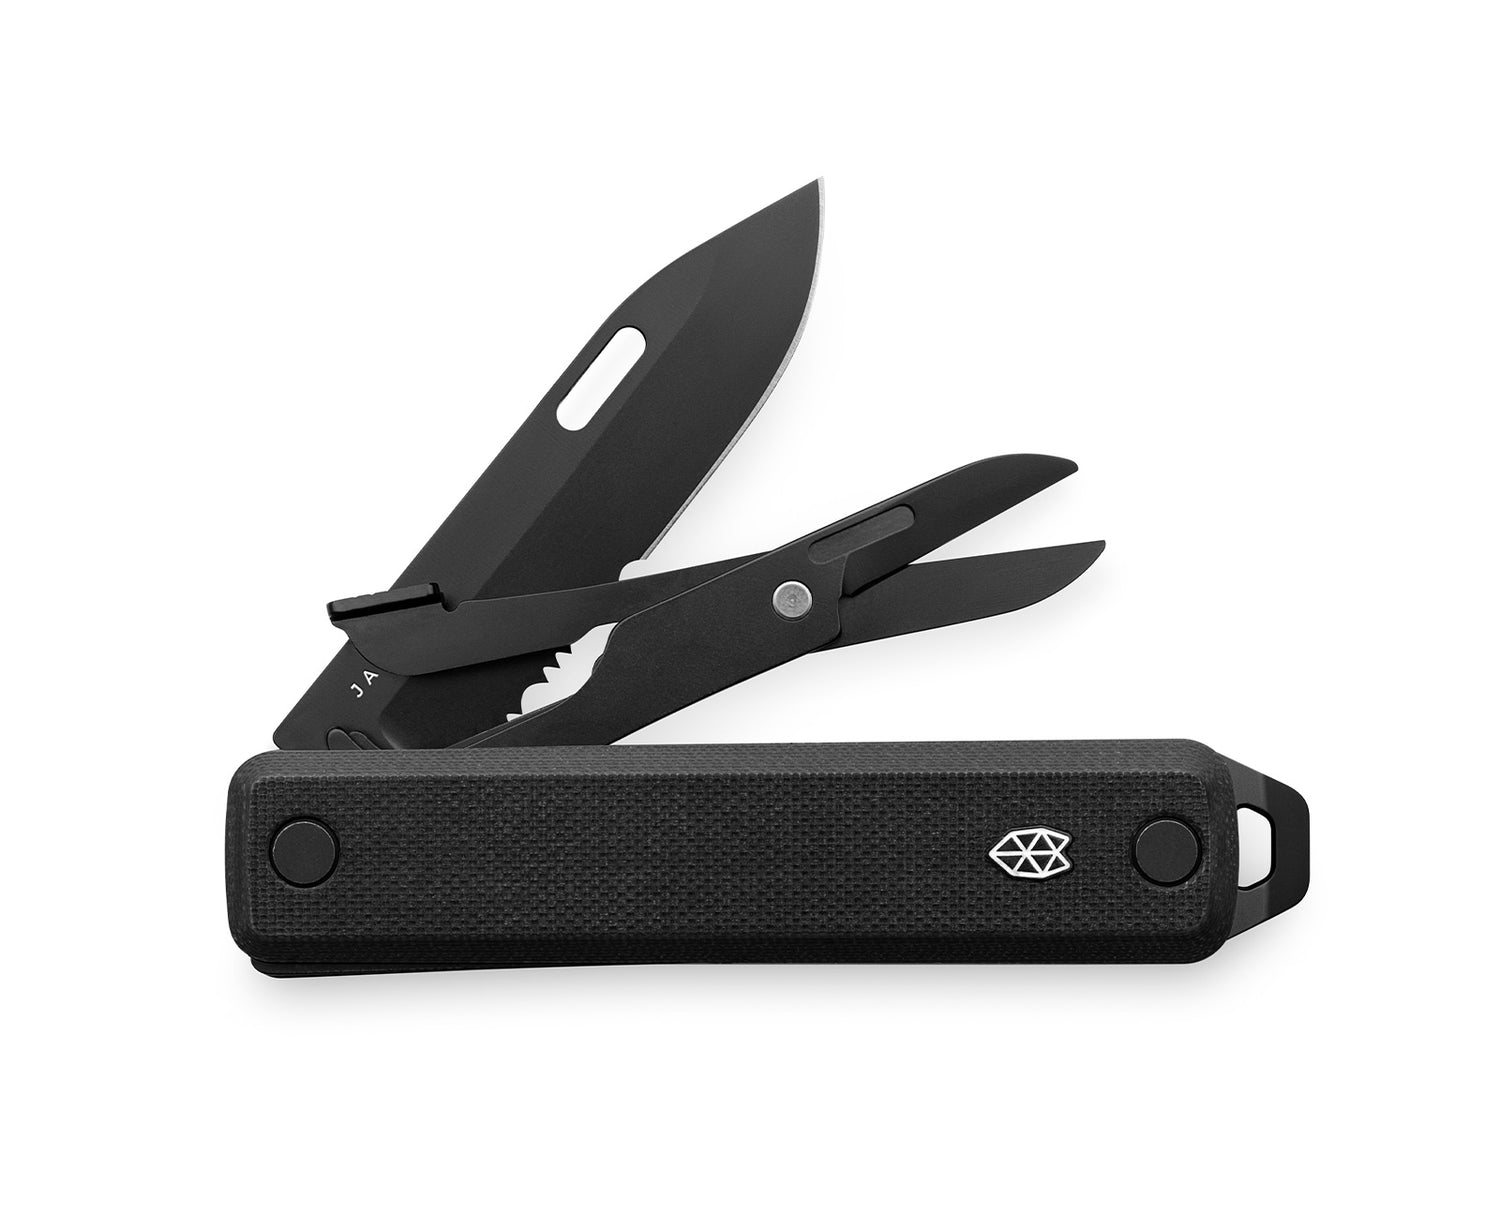 Tools That Don't Suck: Kershaw SpeedSafe Pocket Knives - Advice